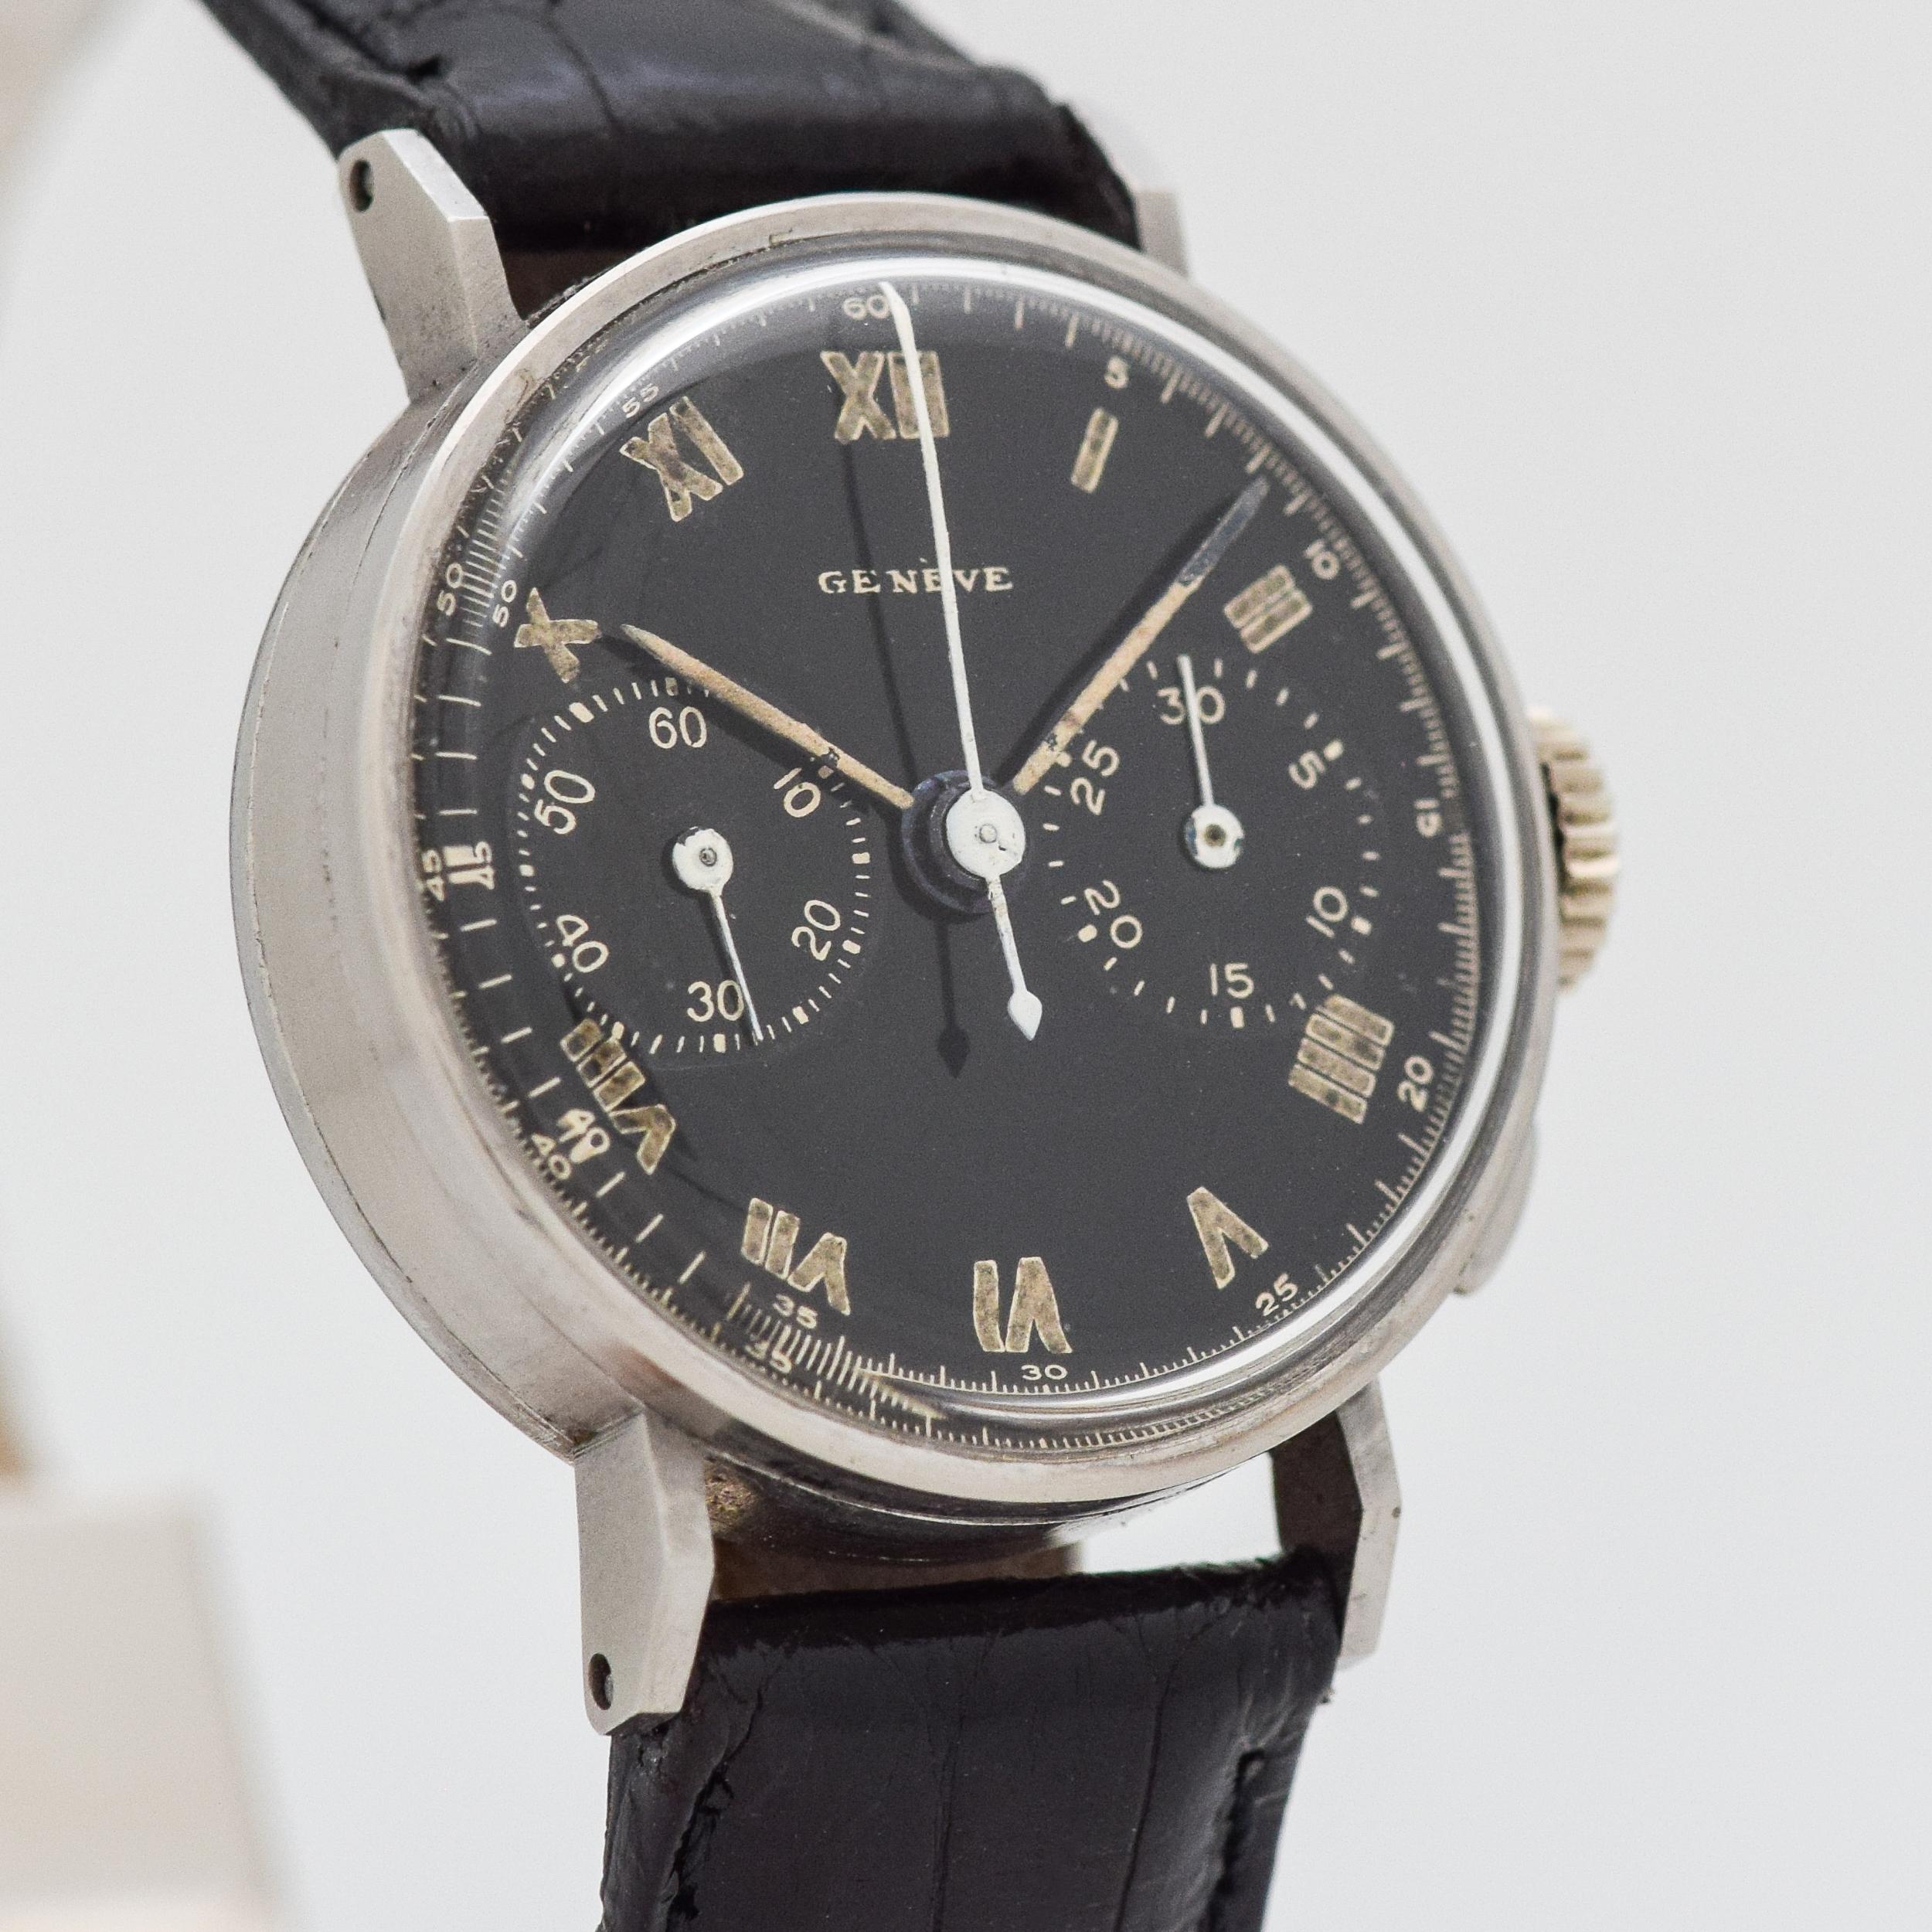 1950's Vintage RARE Heuer Mid-Size 2 Register Chronograph Stainless Steel watch with Black Dial with Luminous Roman Numerals. Suitable for Man, Woman, or Child. 28mm x 34mm lug to lug (1.1 in. x 1.34 in.) - 17 jewel, manual caliber movement. 